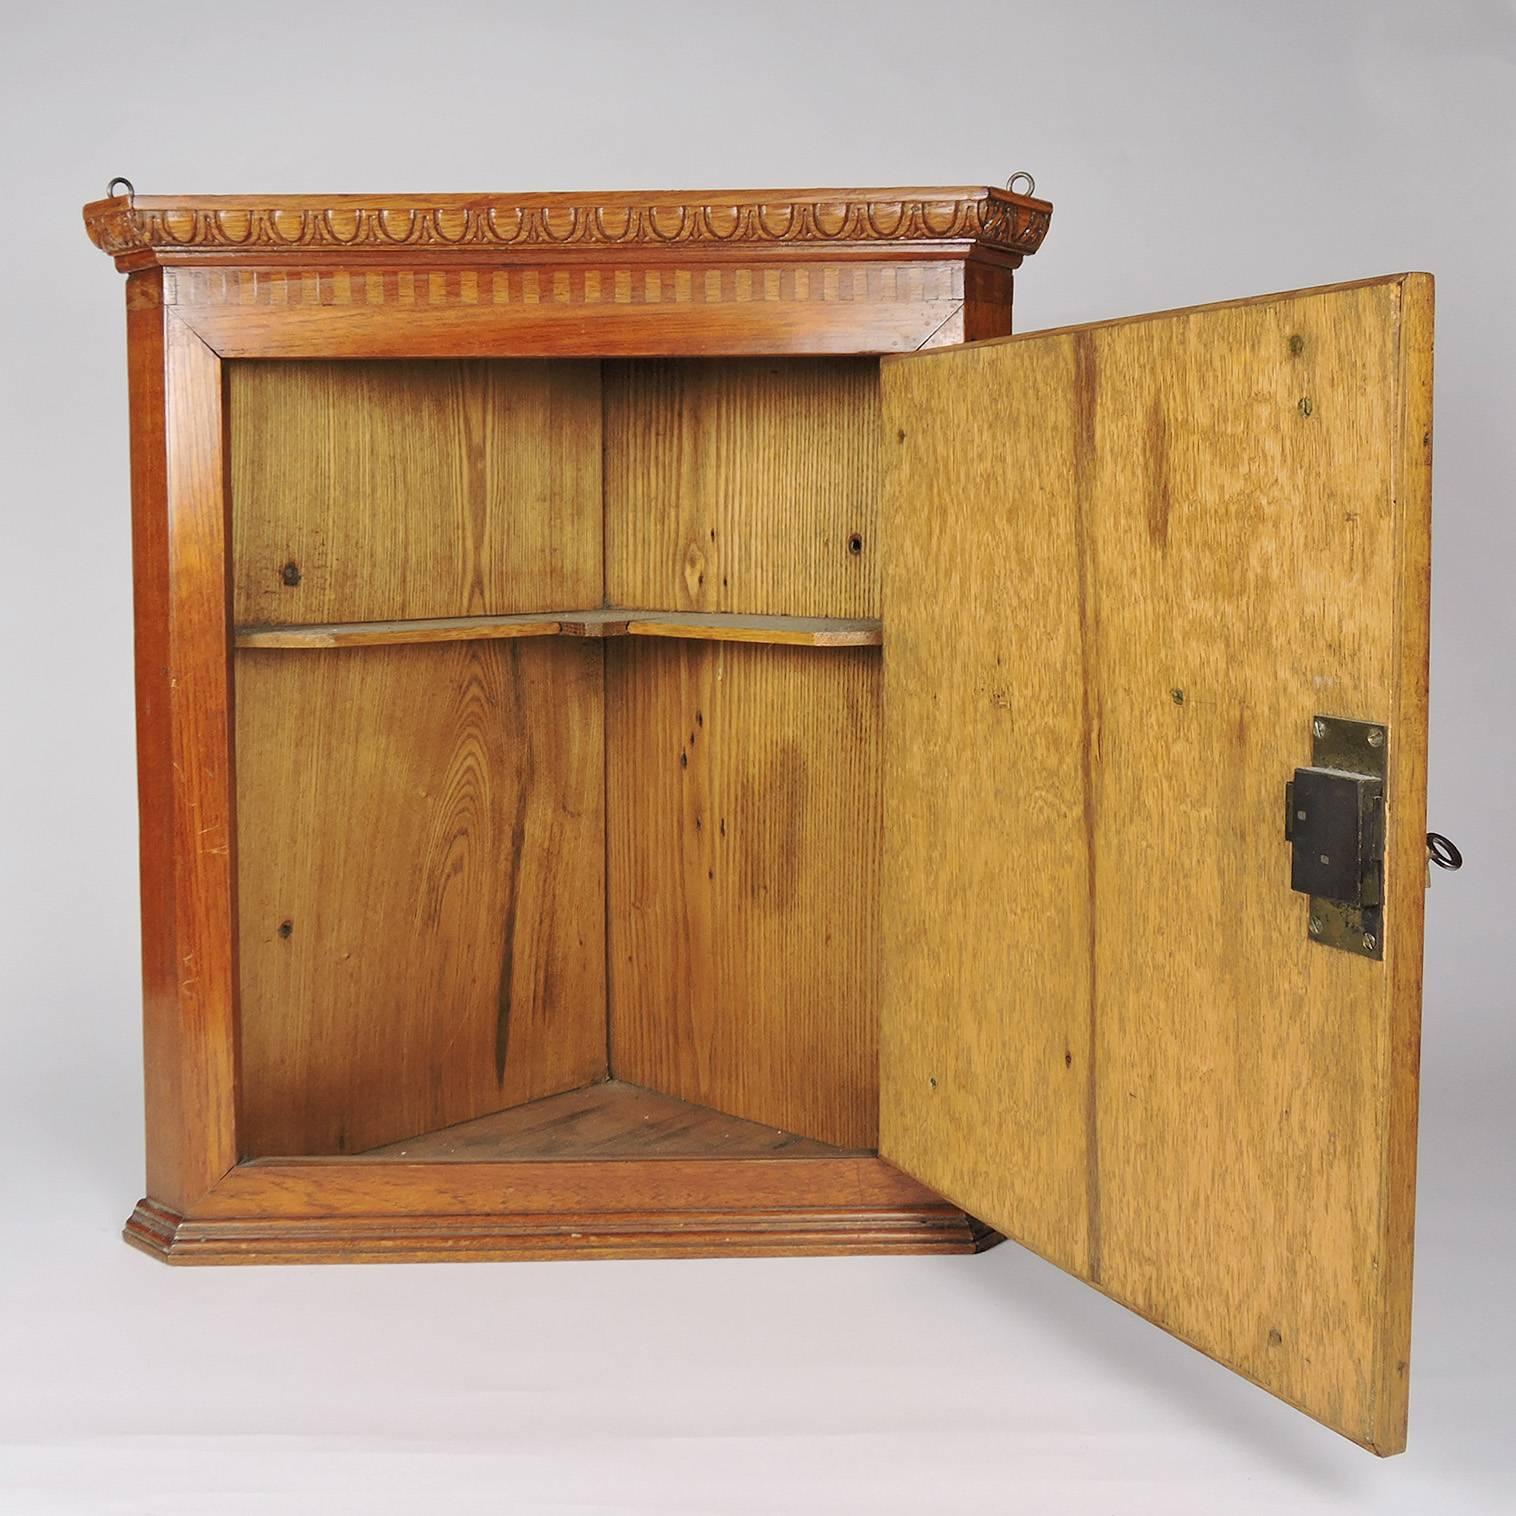 19th century Georgian oak and parquetry fruitwood inlaid hanging corner cabinet, with open interior and locking mechanism. Includes original key.
Dimensions: 19 1/4 x 13 3/4 x 10 inches.

 